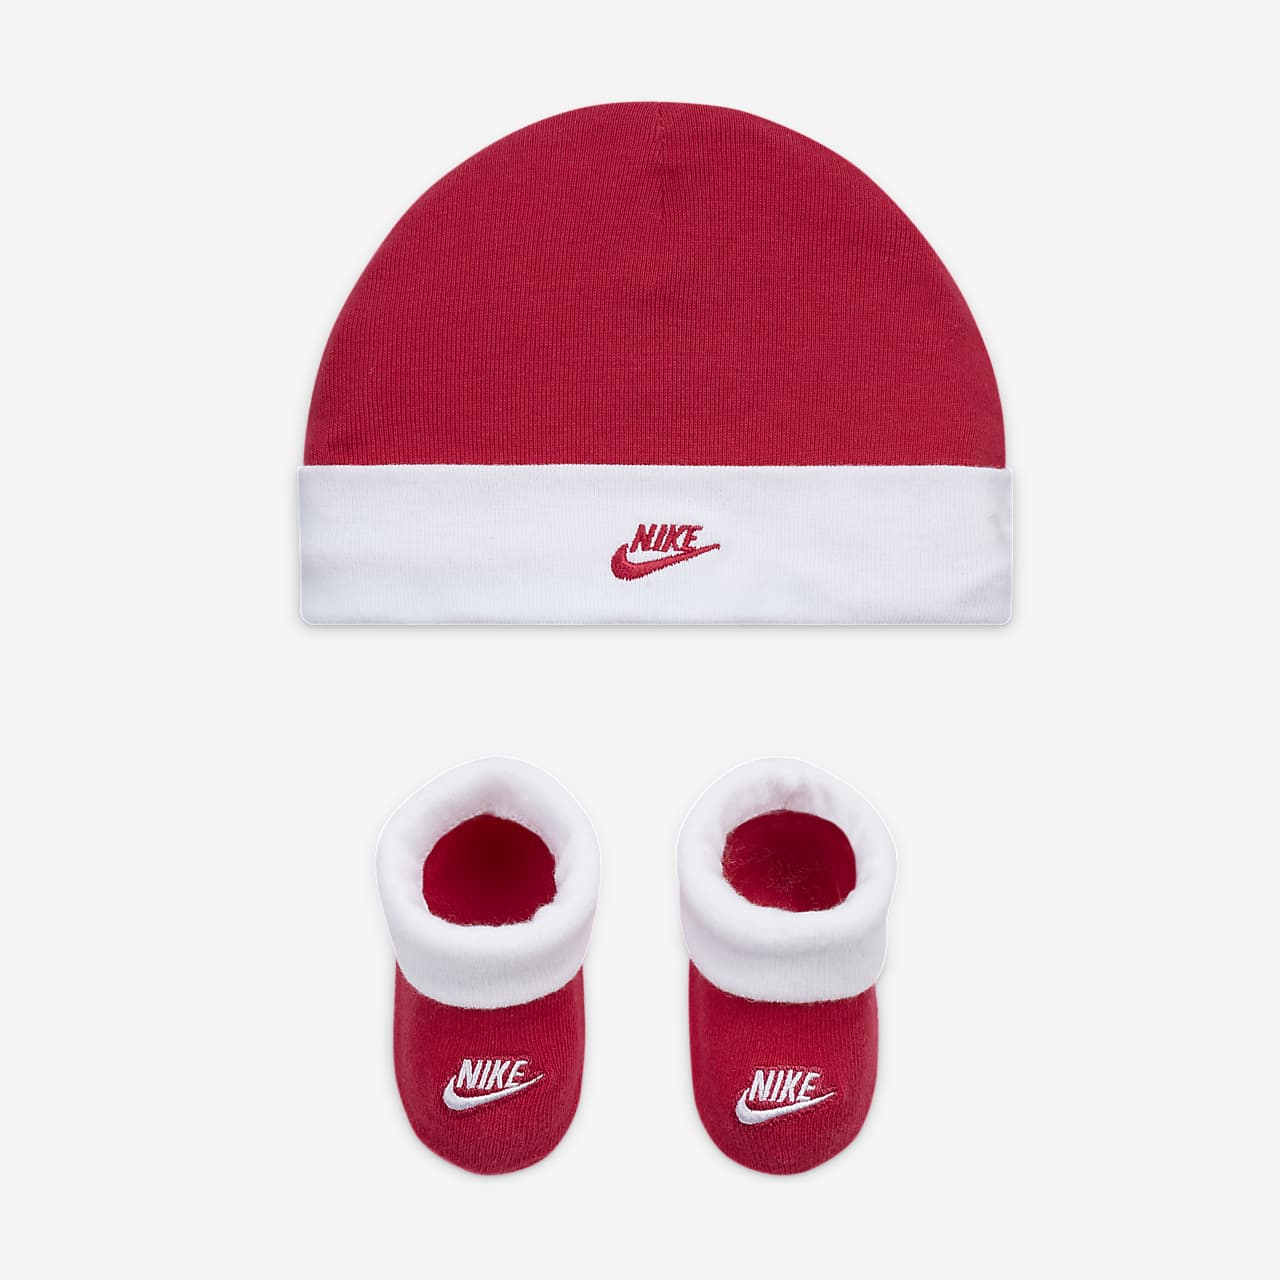 Nike Baby Hat and Booties Set.